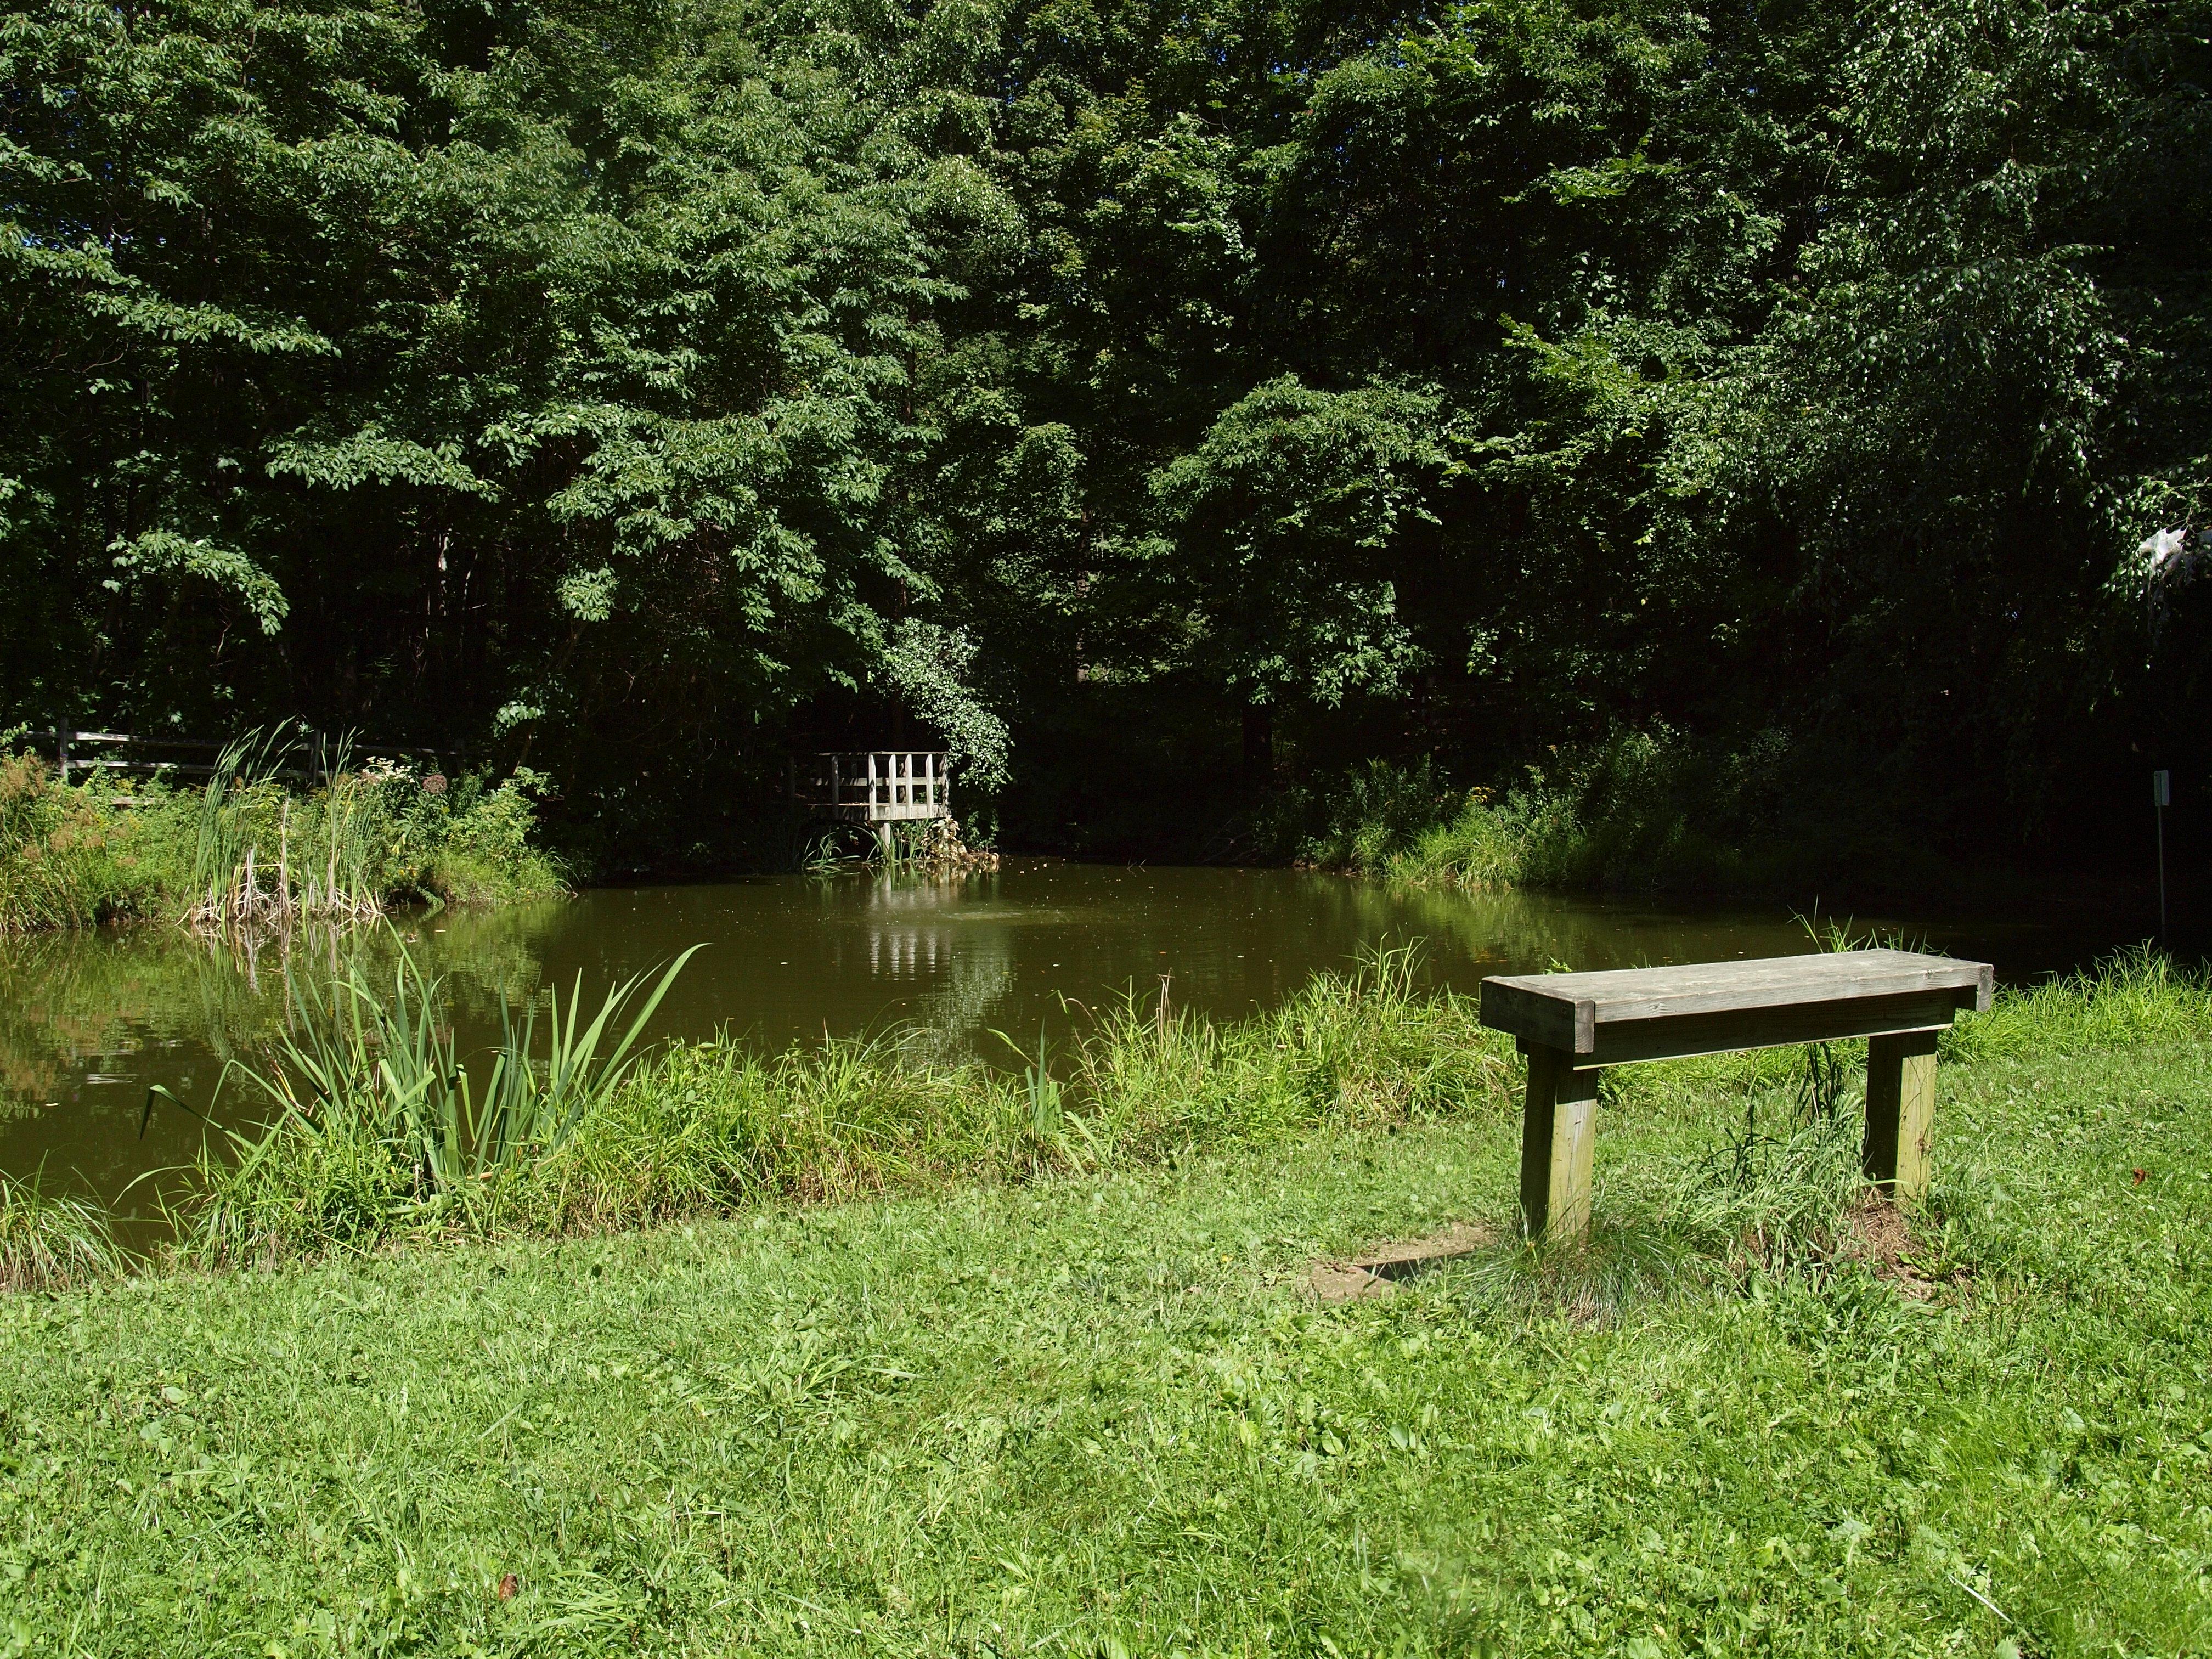 A bench in the grass overlooks a pond on the Nature Center property